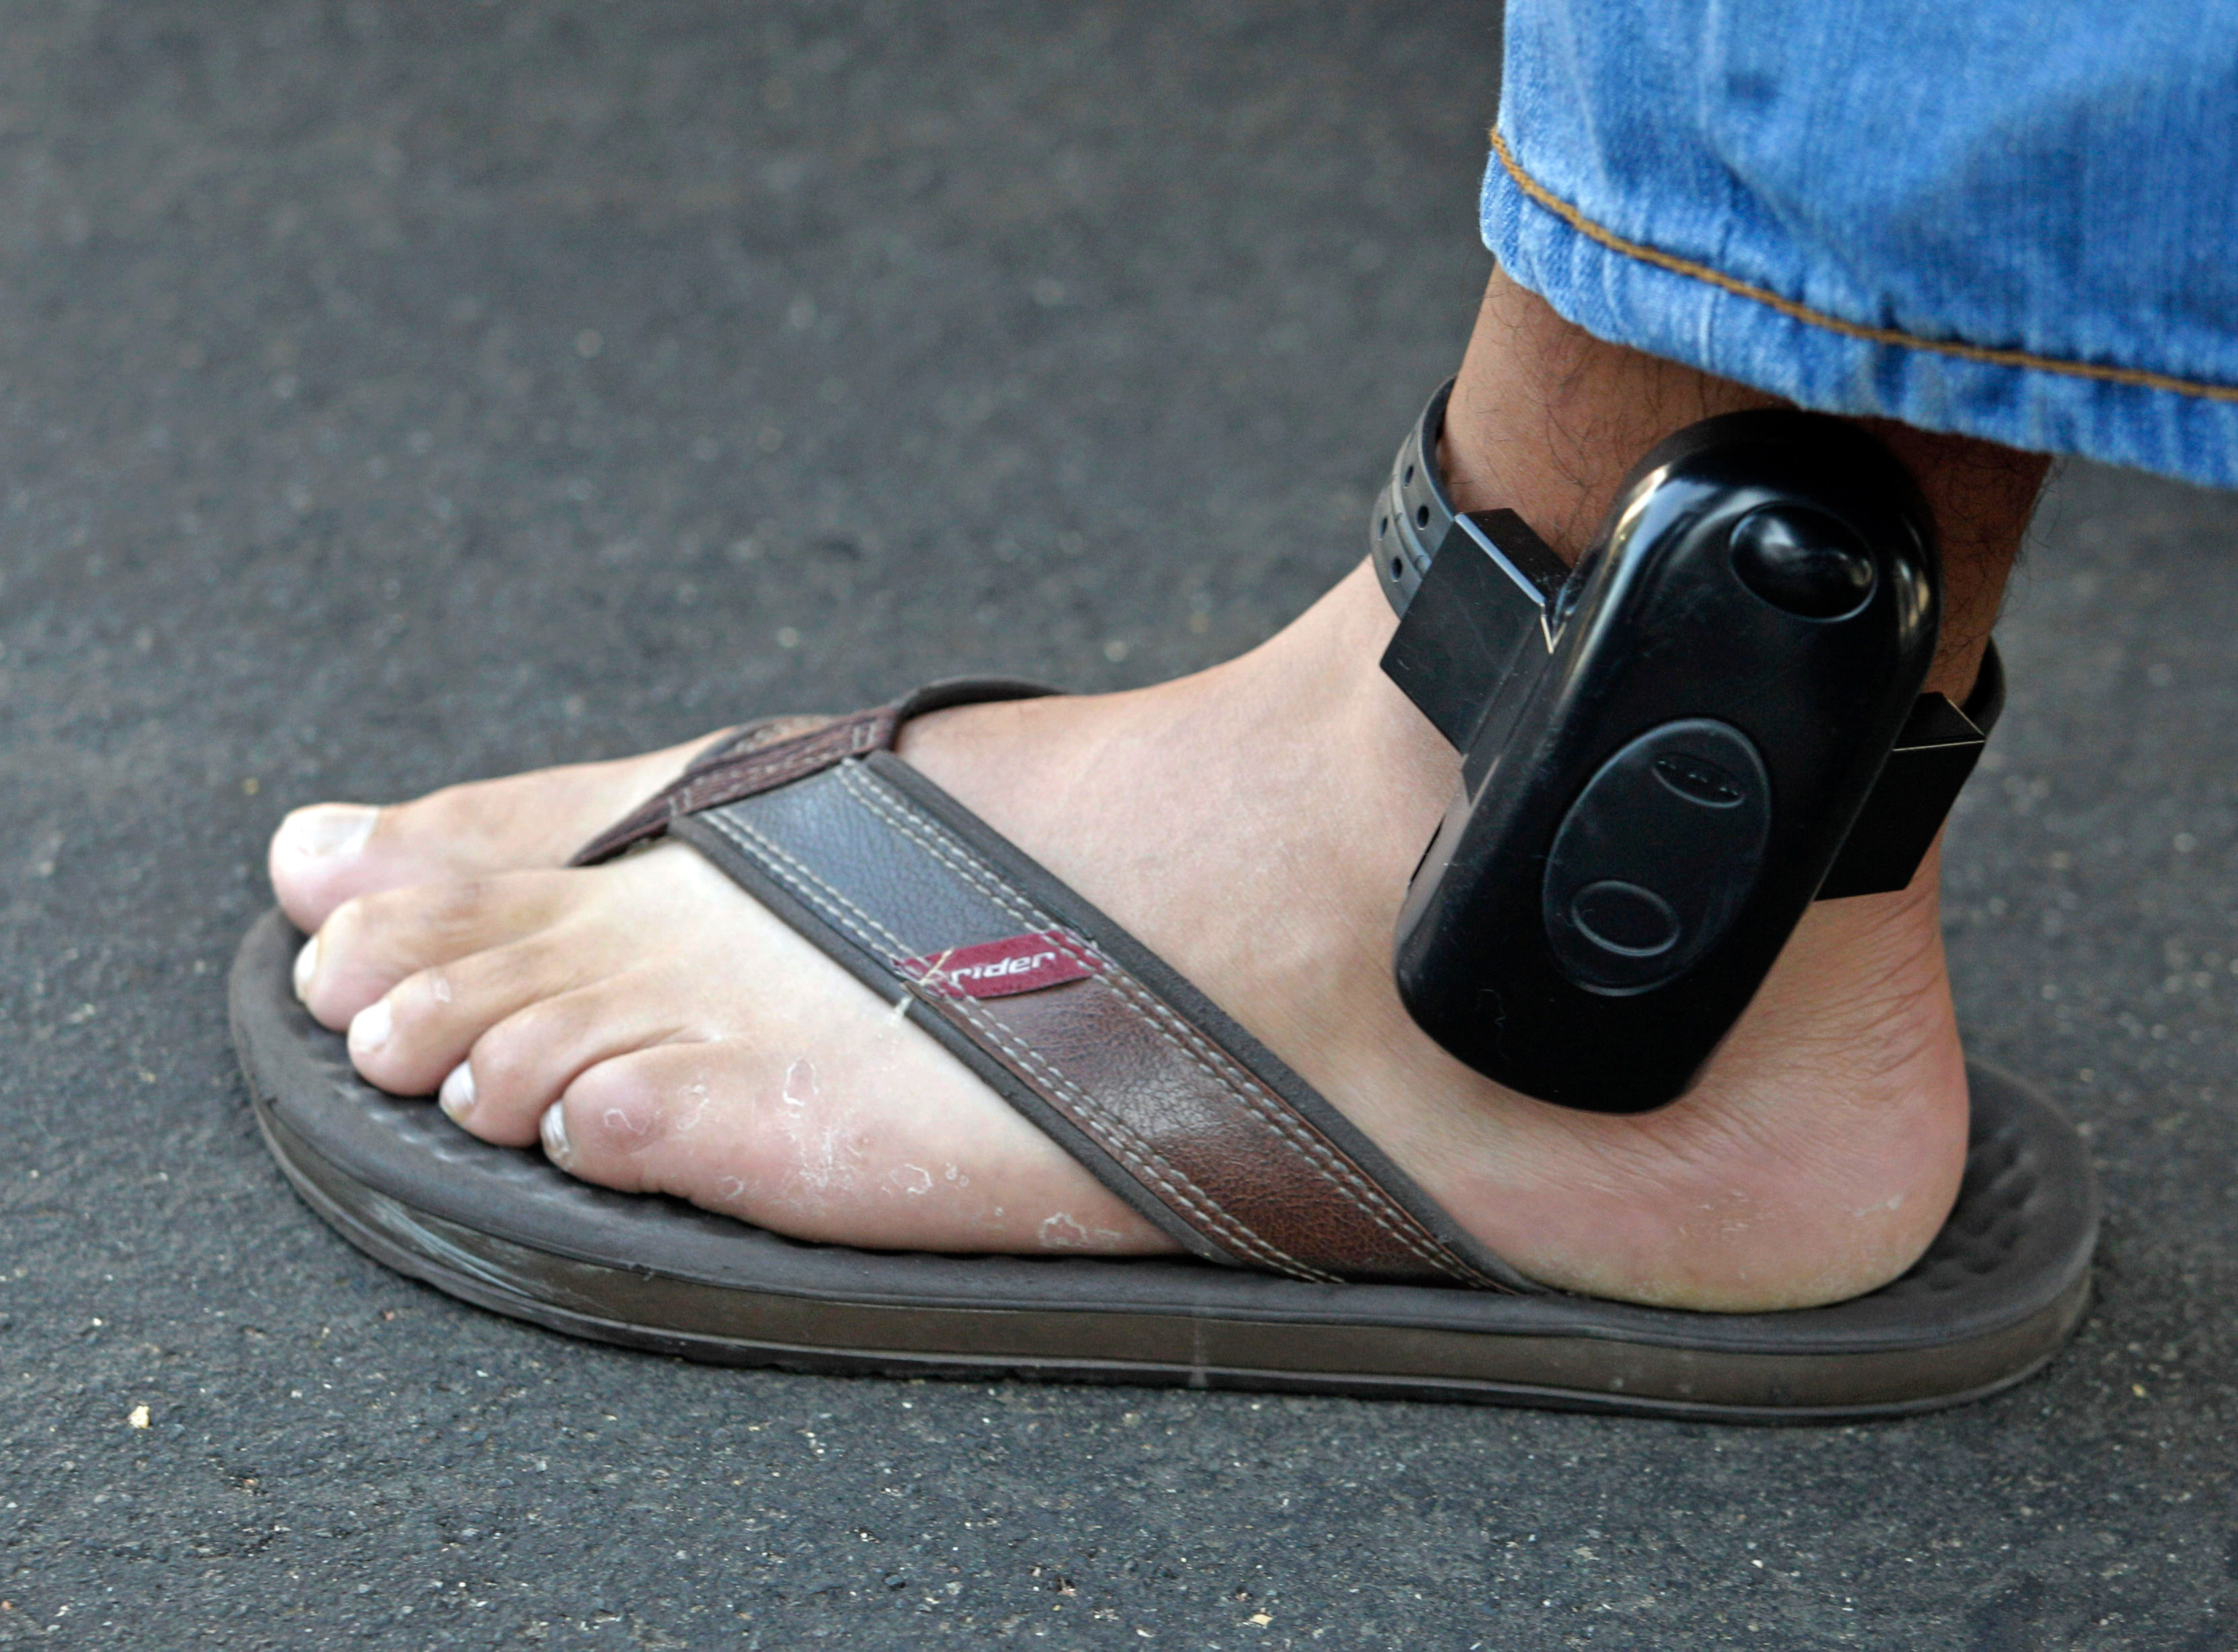 How parents are using GPS-equipped ankle monitors to track teens